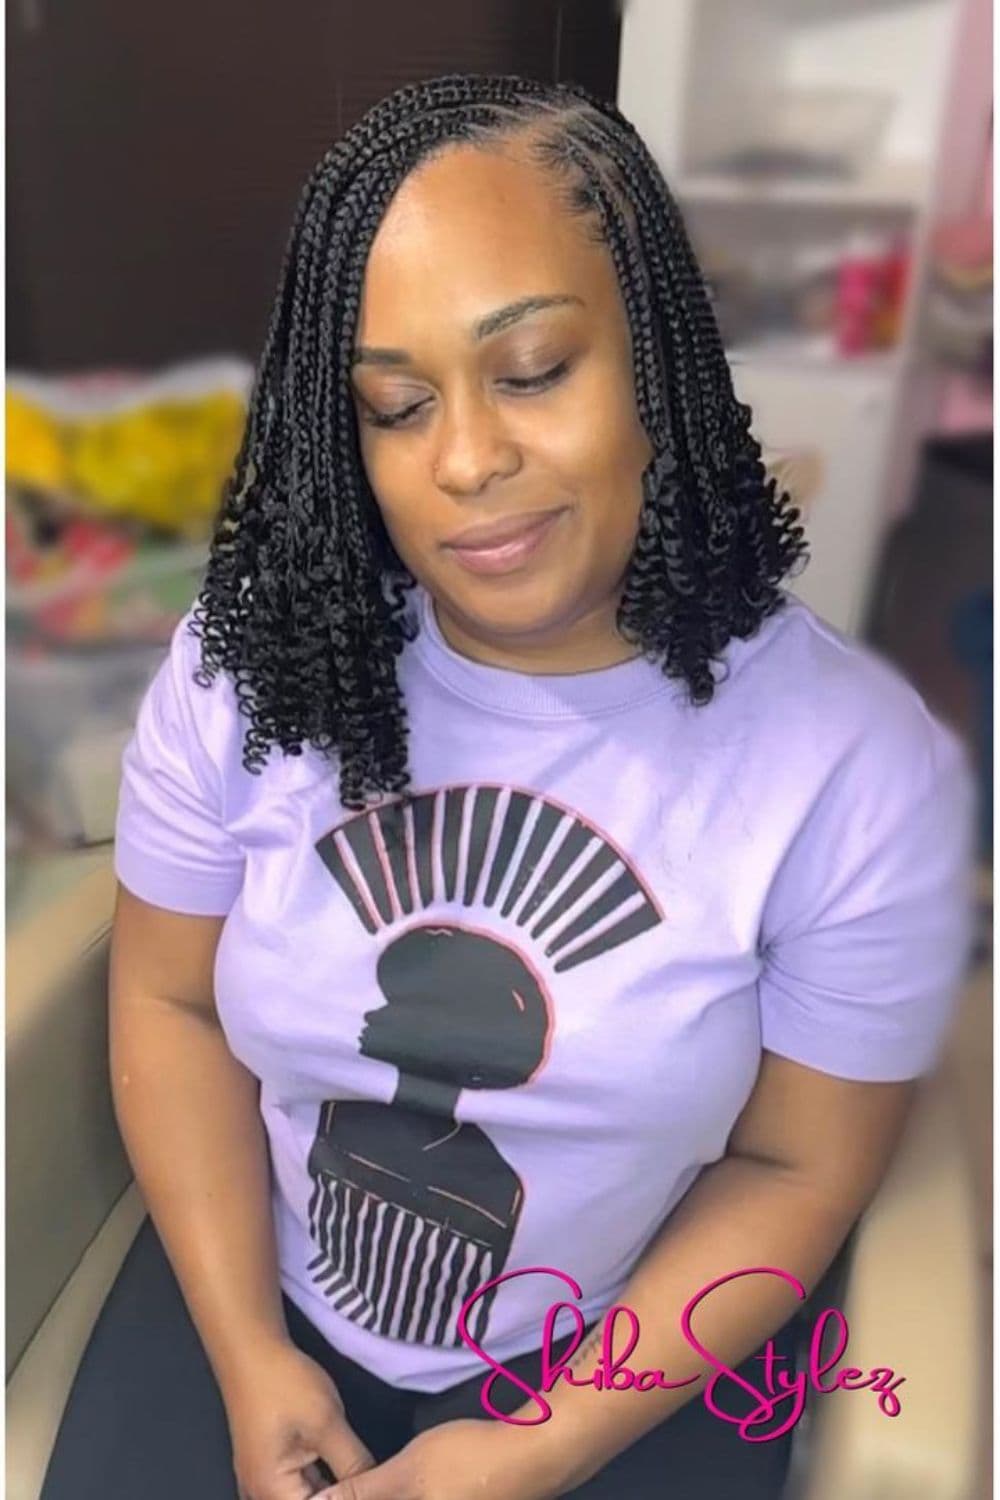 A woman sitting wearing a lavender t-shirt with black shoulder-length medium knotless braids with curly ends.